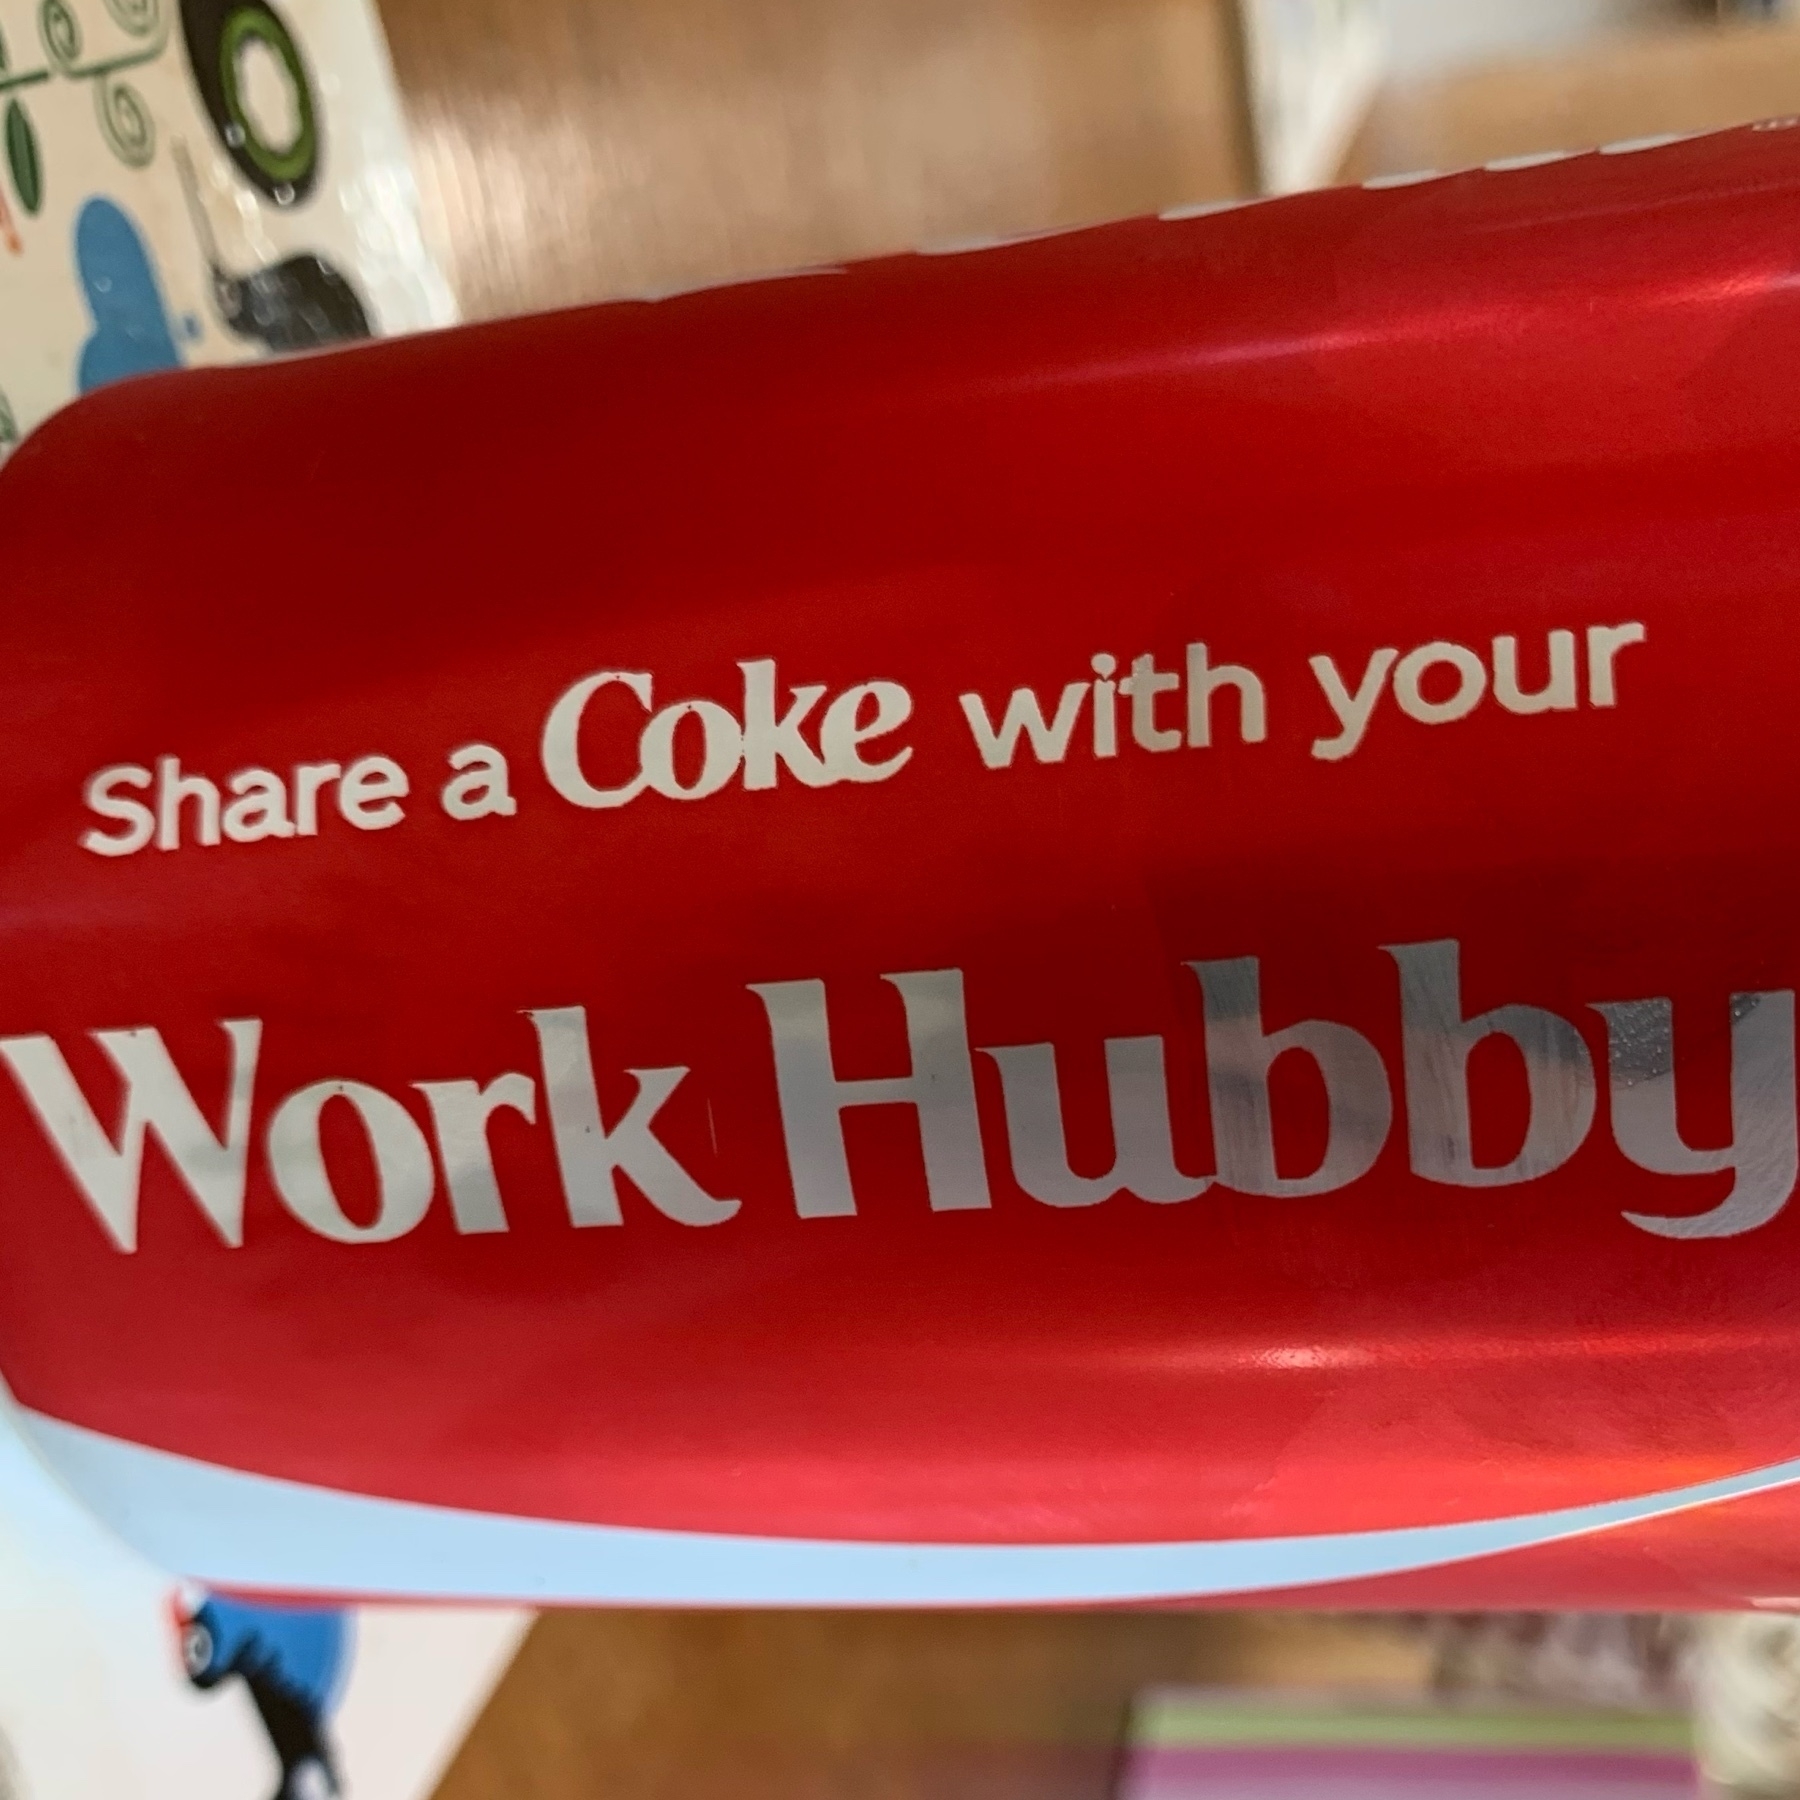 A coke cane saying Share a Coke with your Work Hubby